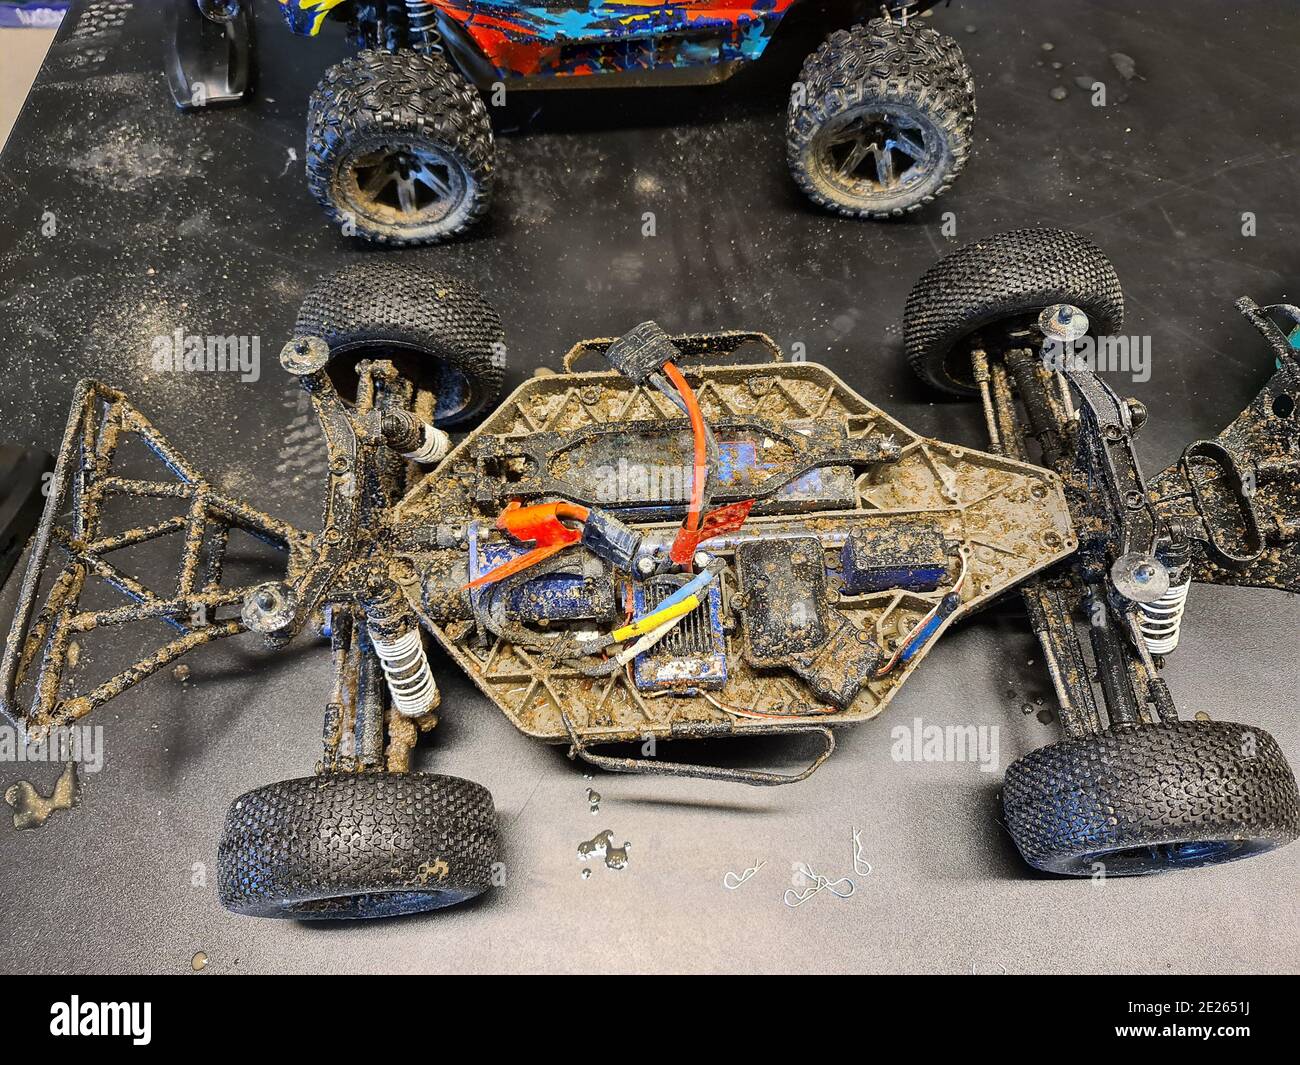 Close up view of dirty disassembled radio controlled toy car. Stock Photo